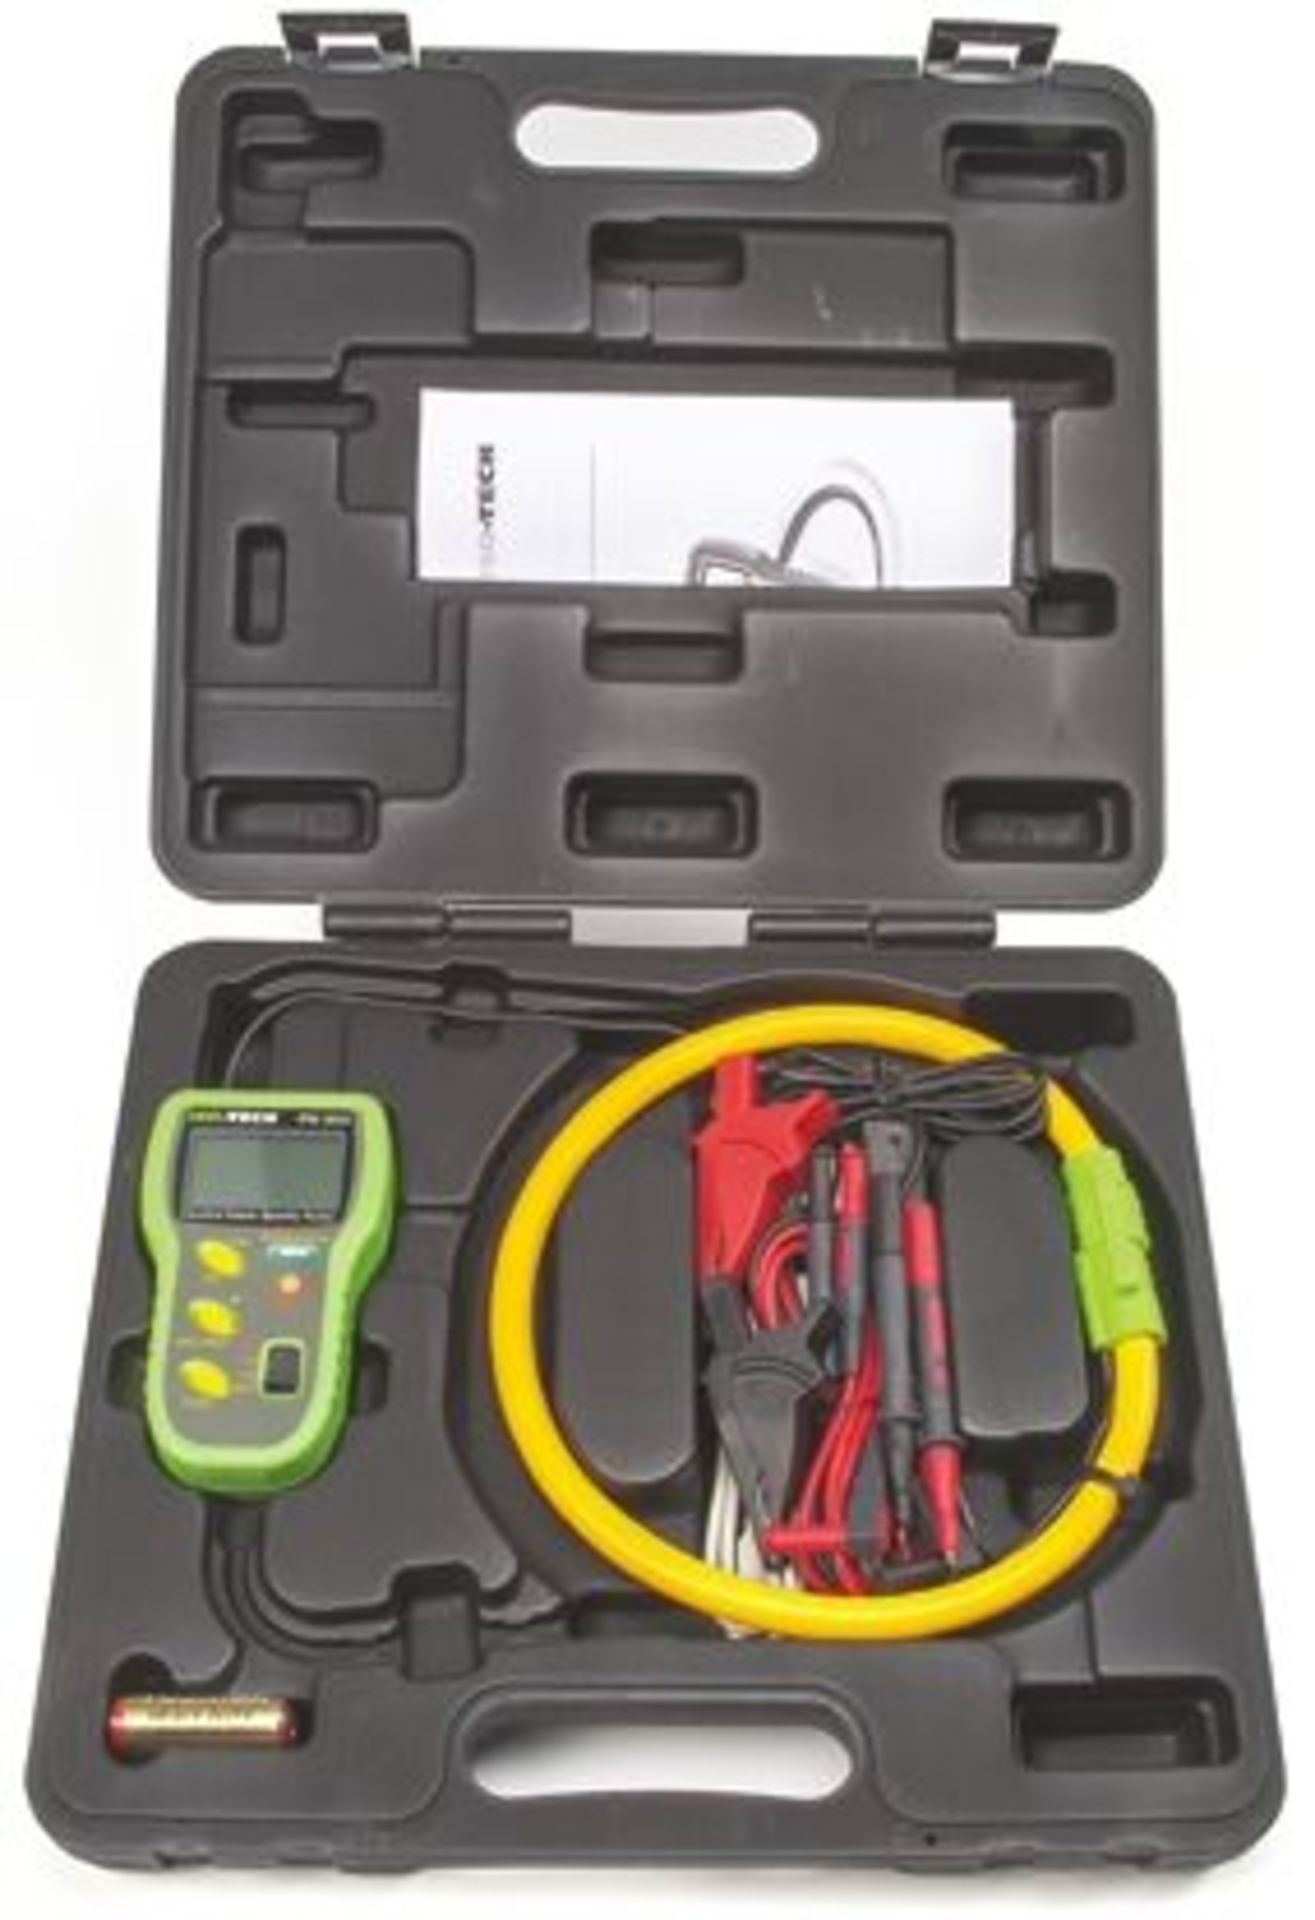 ISO-TECH IPM3005 3000A ac Power Quality Analyser - Image 3 of 3